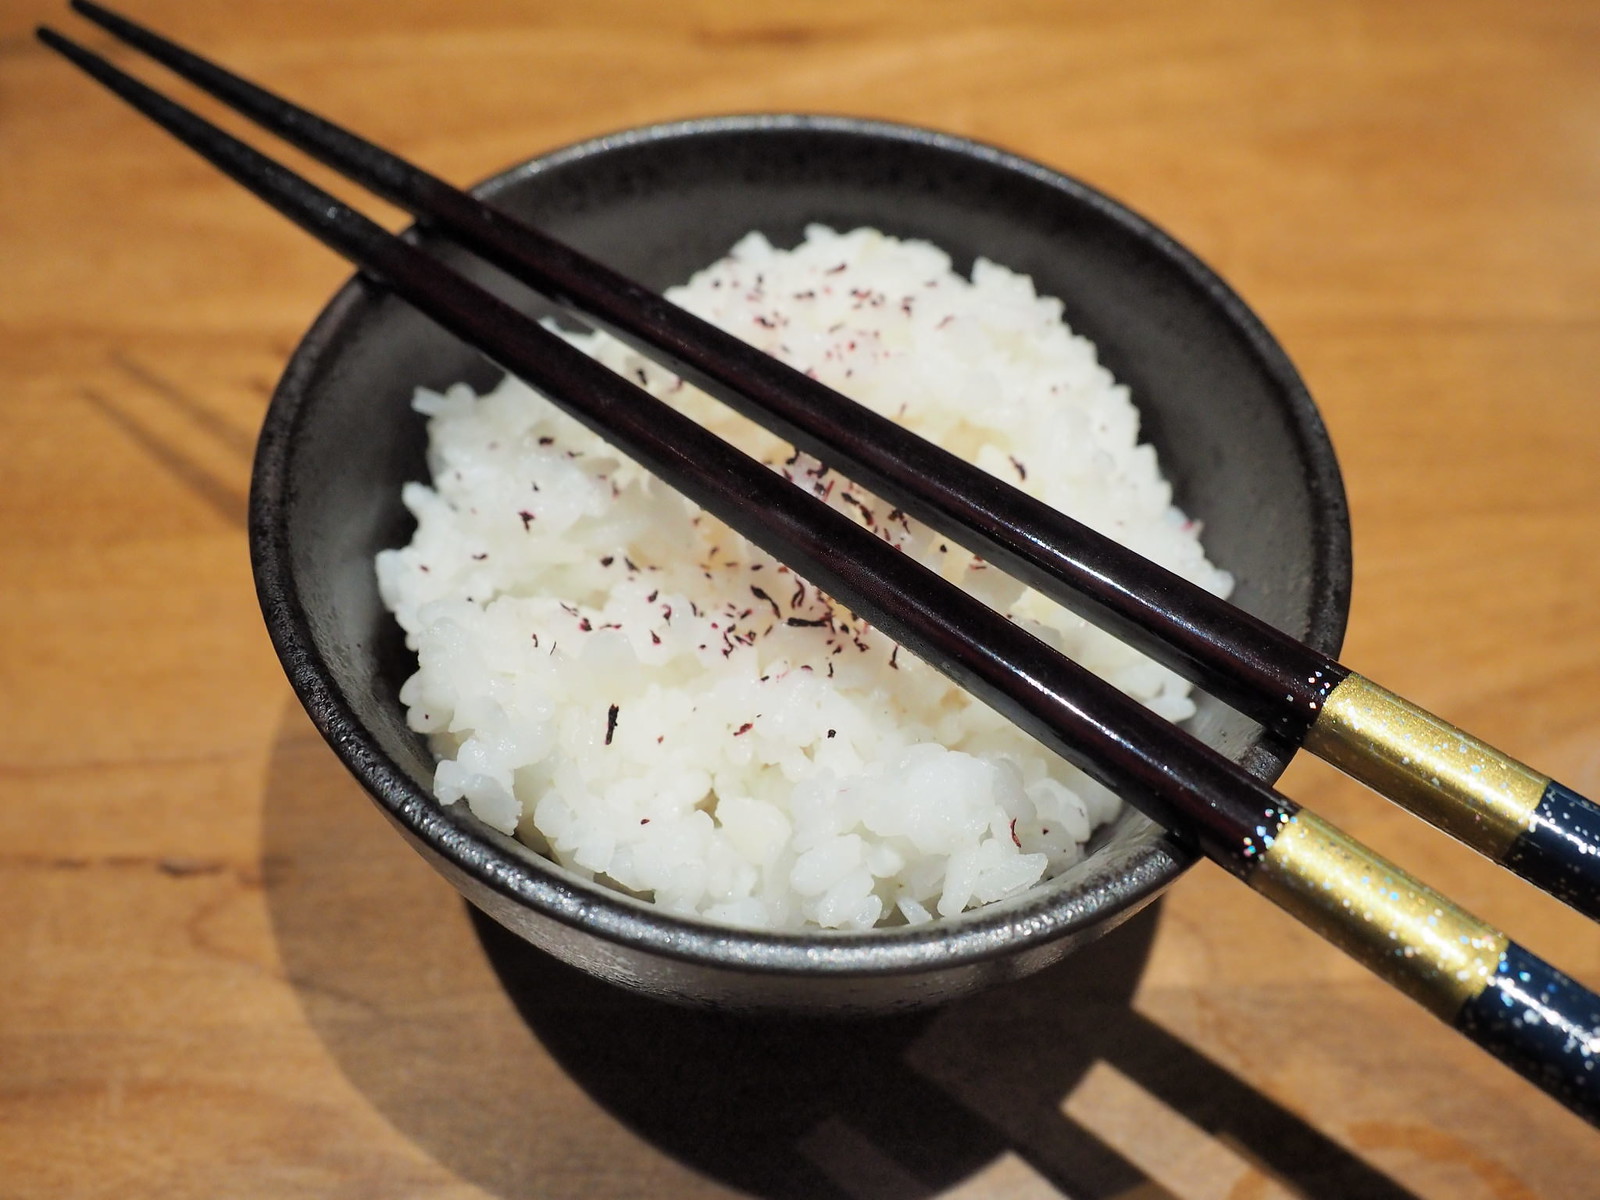 The bowl of rice for the dinner set